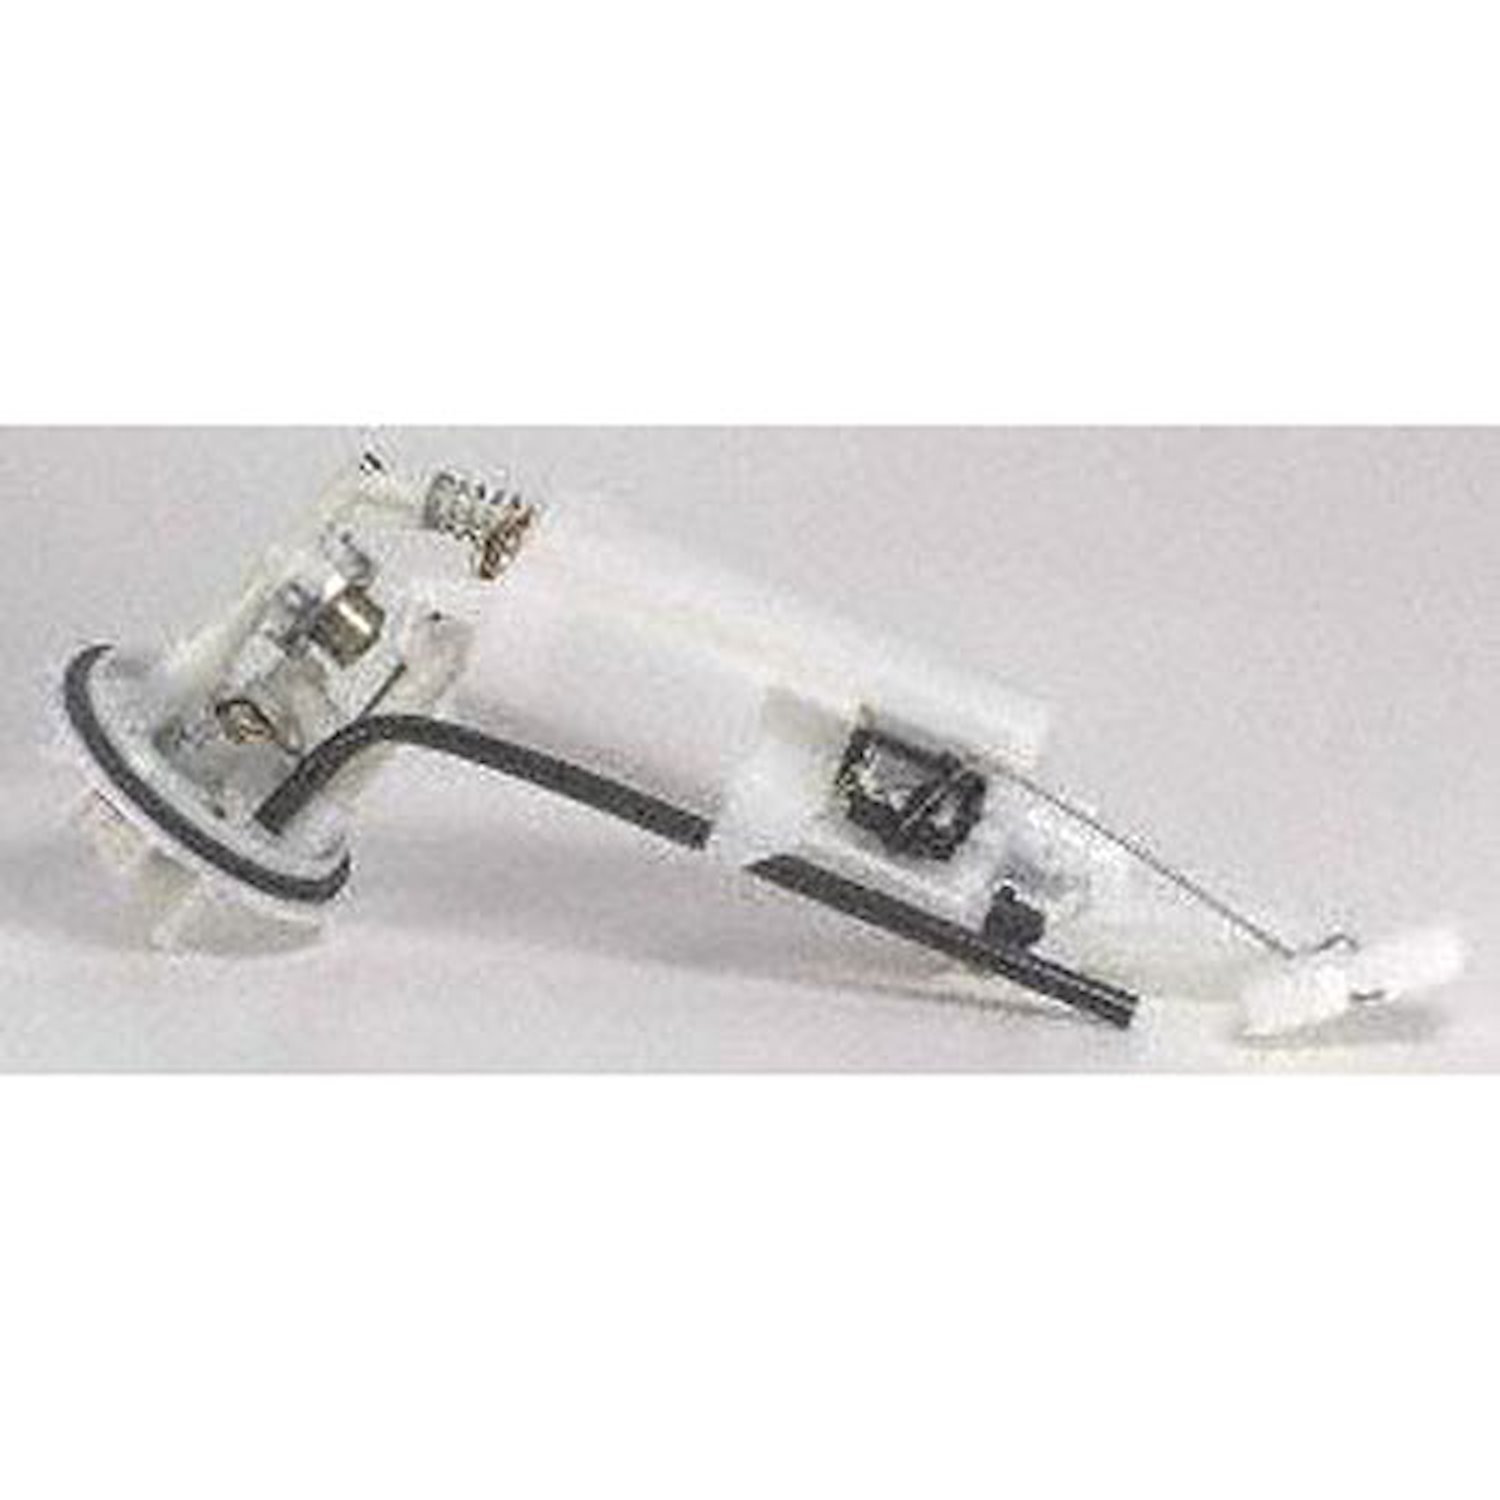 OE Chrysler/Dodge Replacement Electric Fuel Pump Module Assembly 1995-97 Dodge Neon 2.0L 4 Cyl